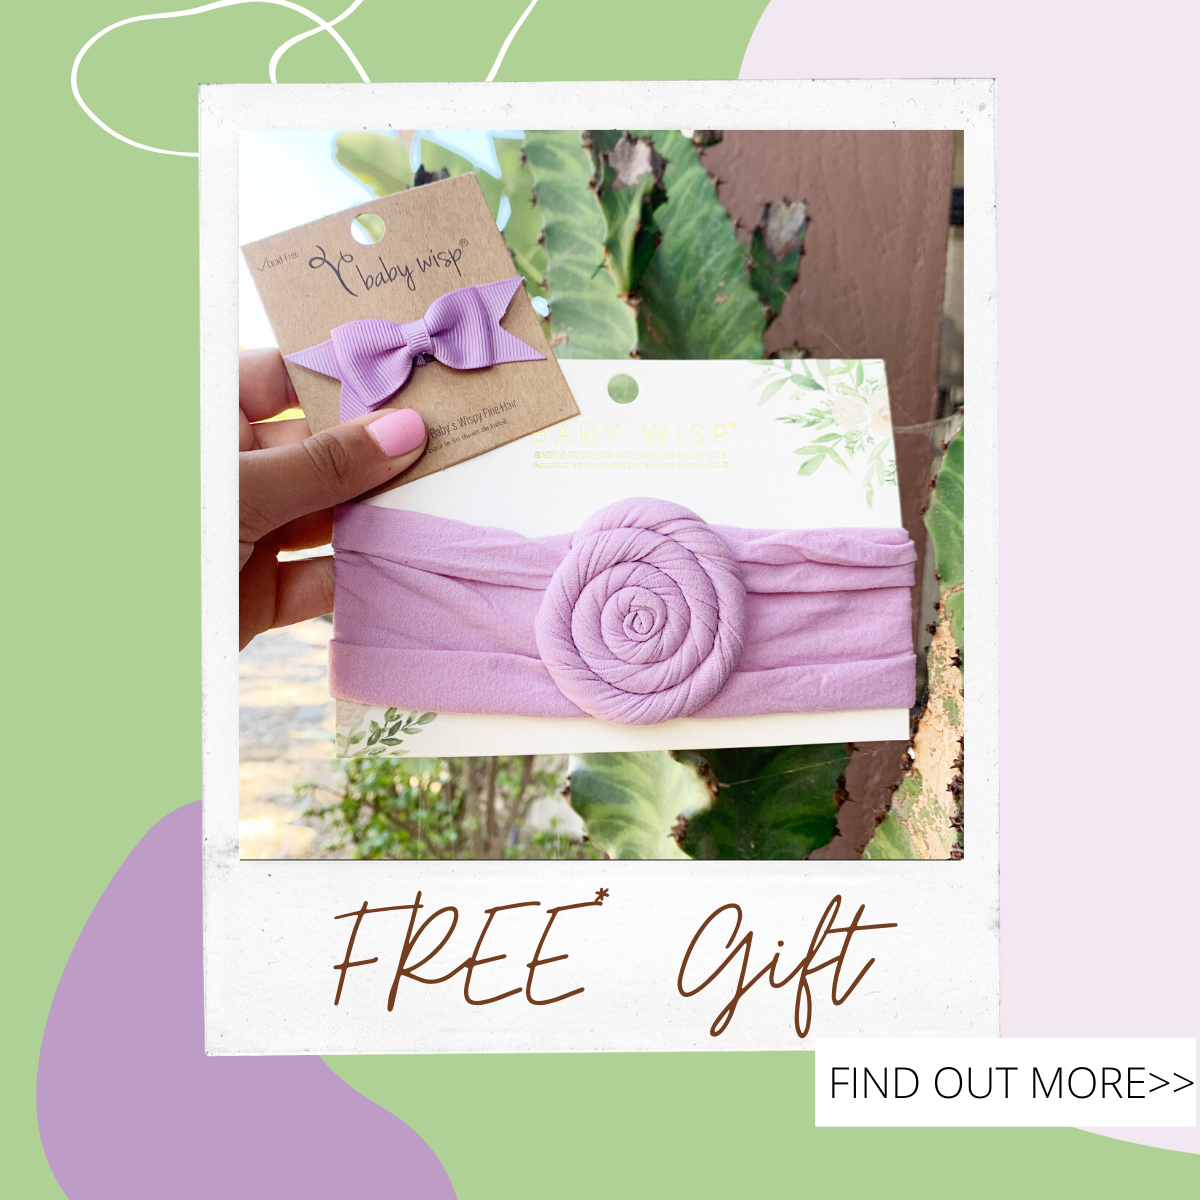 FREE* Headband and Wisp Clip at Baby Wisp® This Month!